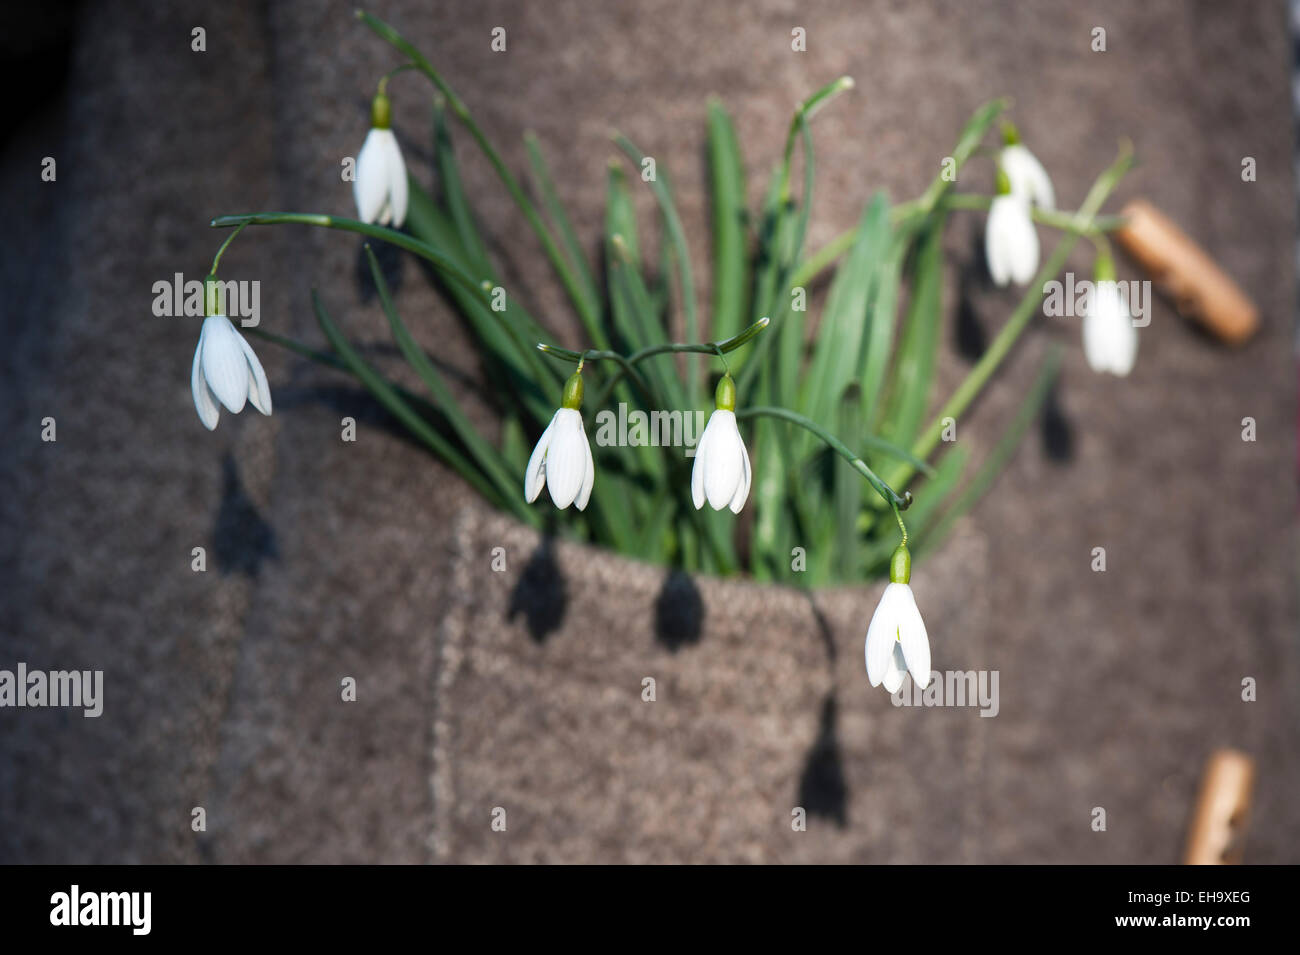 Snowdrop (Galanthus nivalis) in a pocket of a woolen jacket Stock Photo